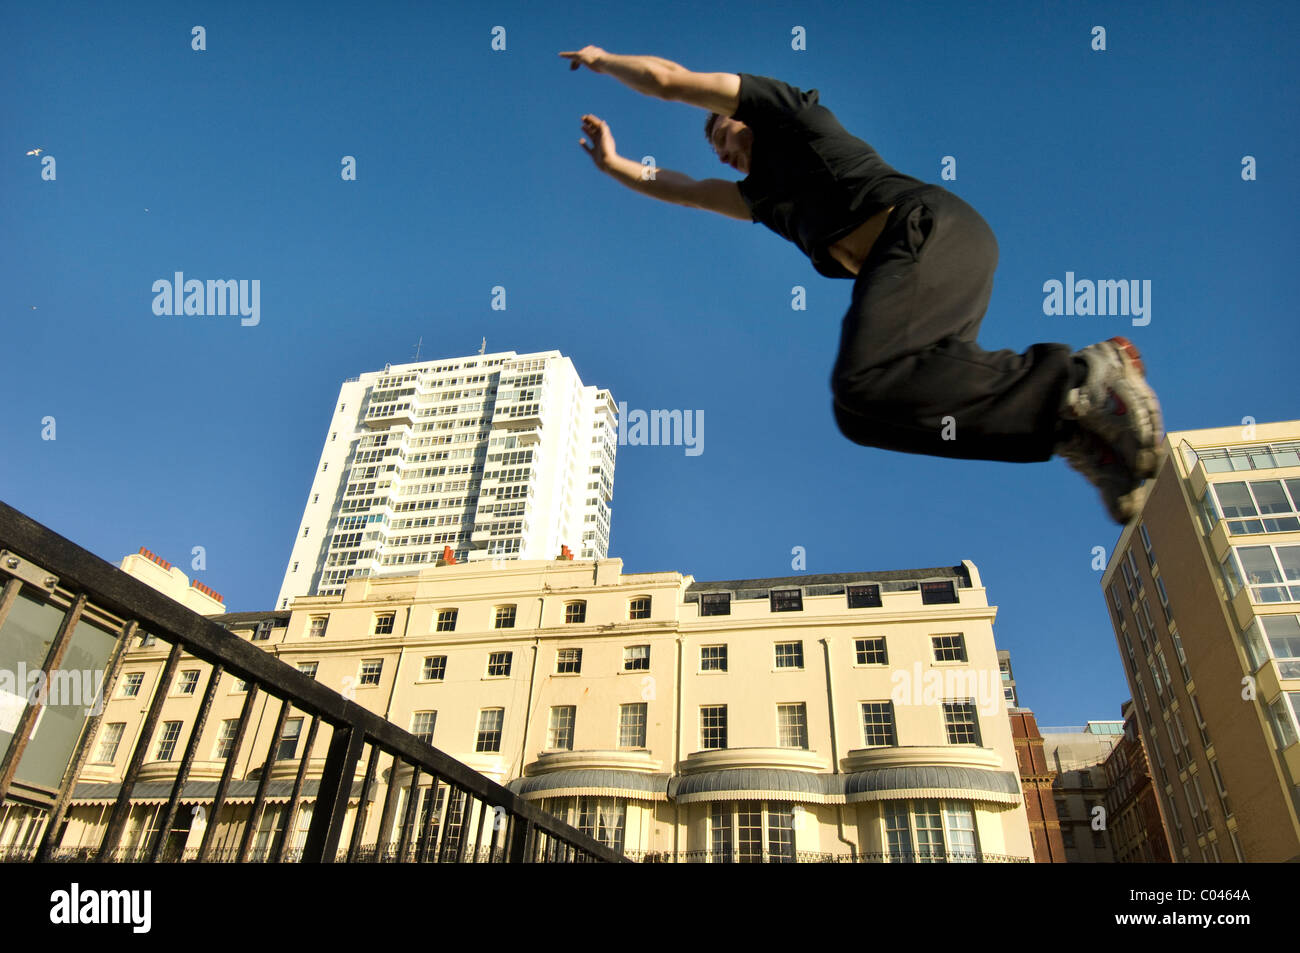 Ben Ockwell practices Parkour, or  FreeRunning, in Regency Square, Brighton, East Sussex, England Britain UK Stock Photo